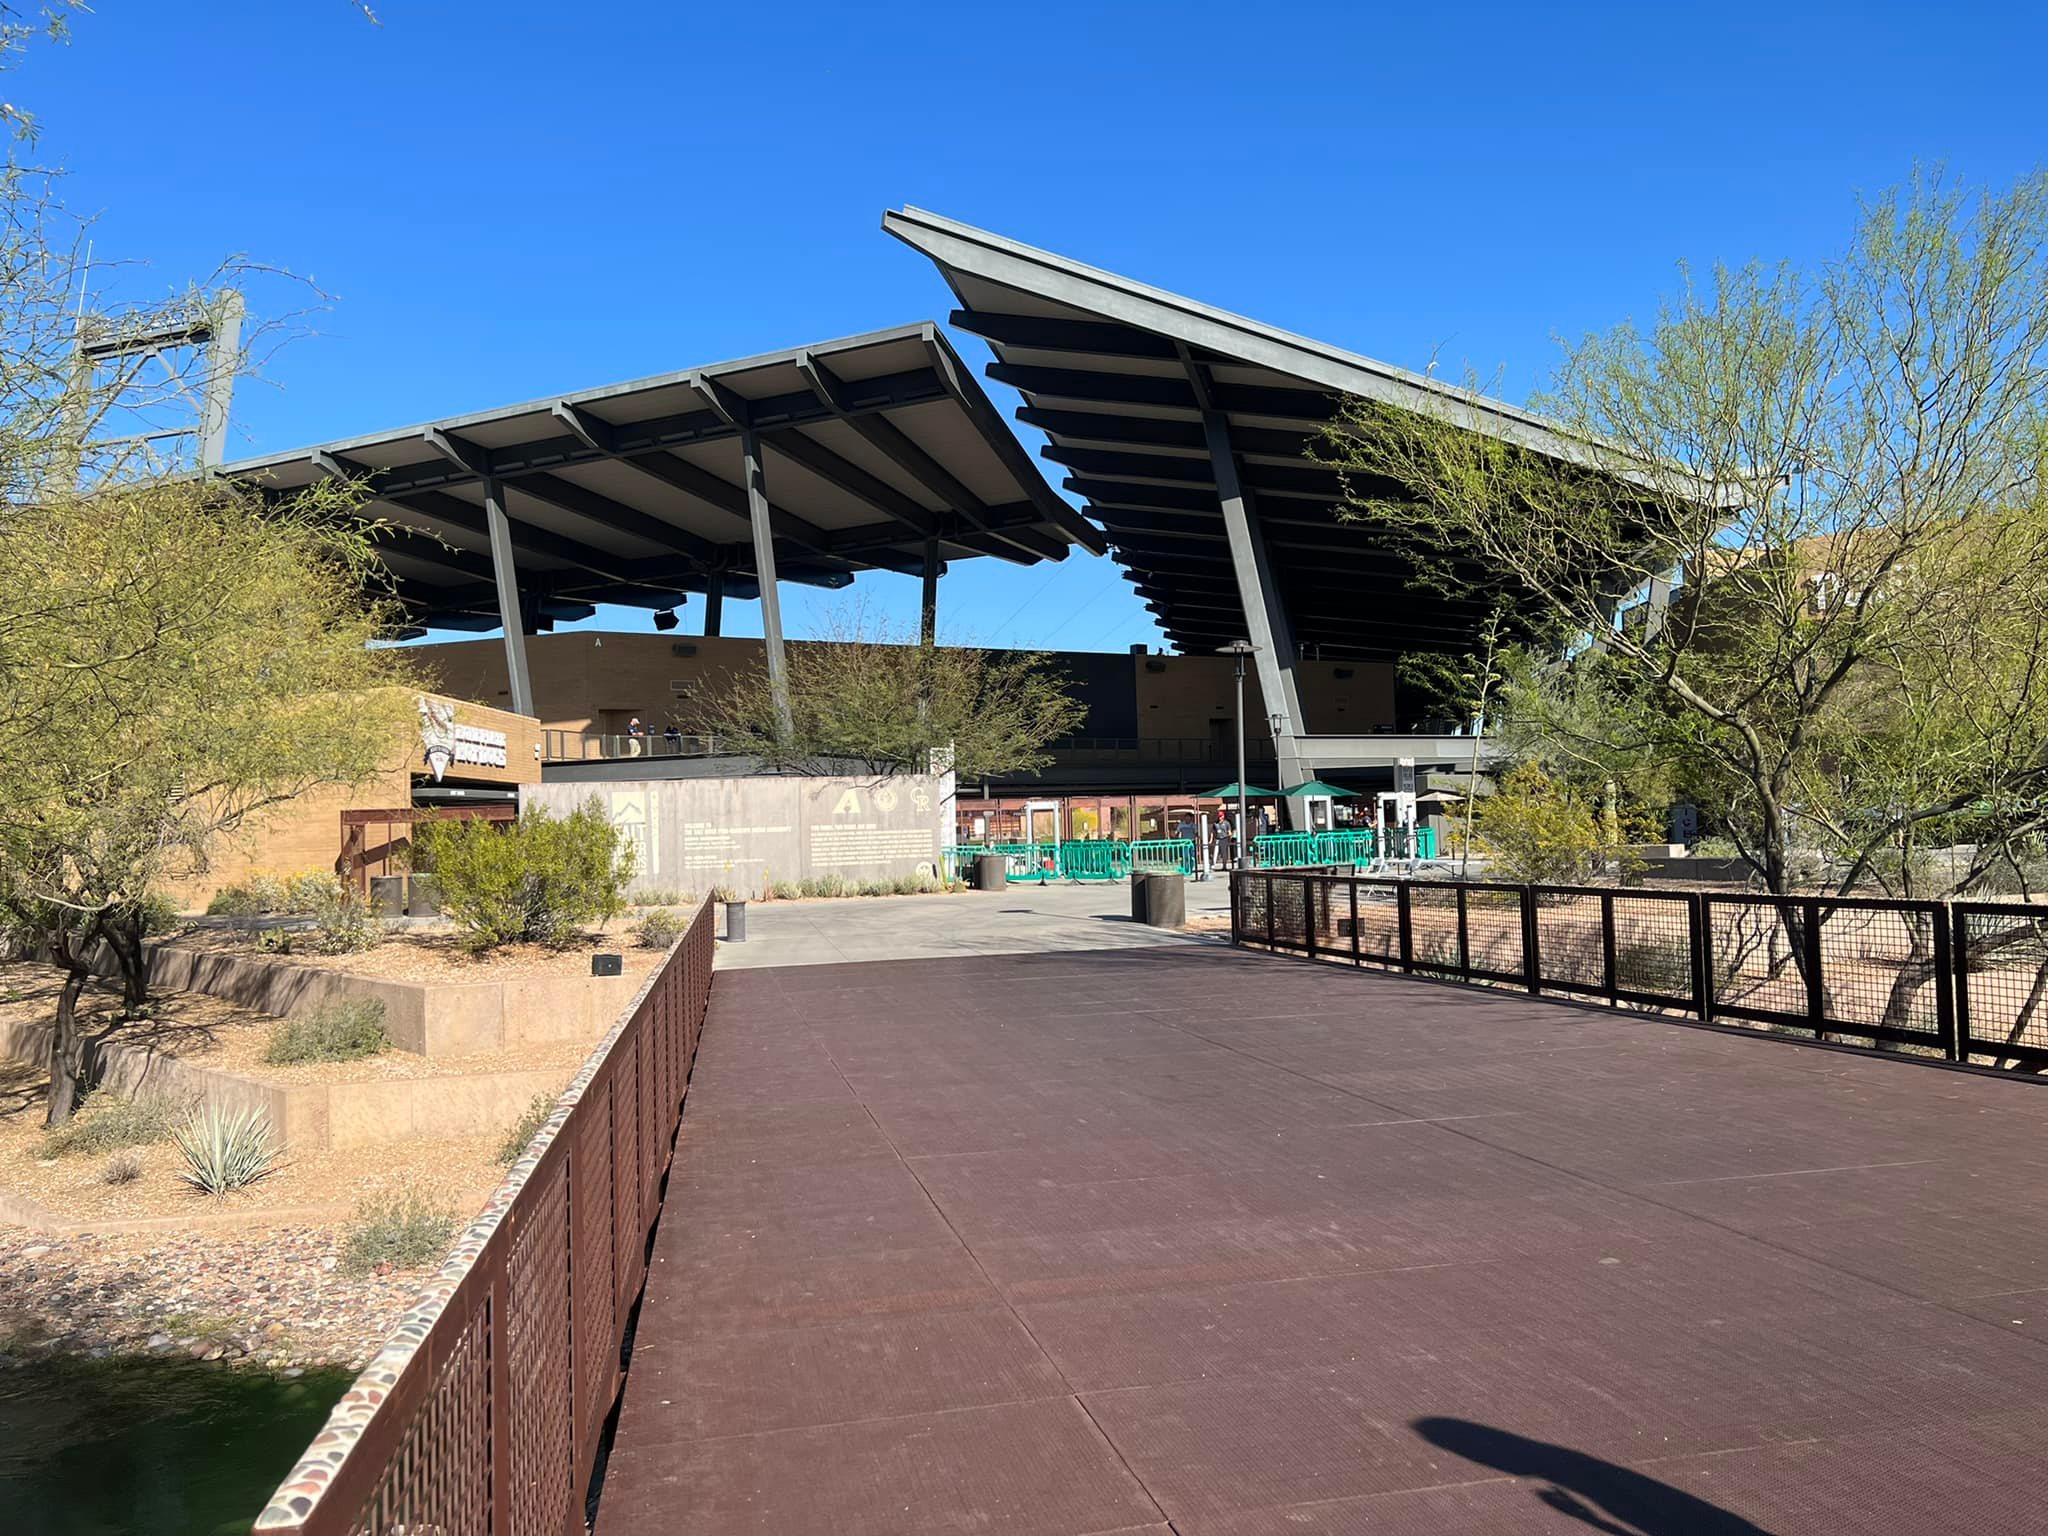 Salt River Fields is inspired by Native American architecture.